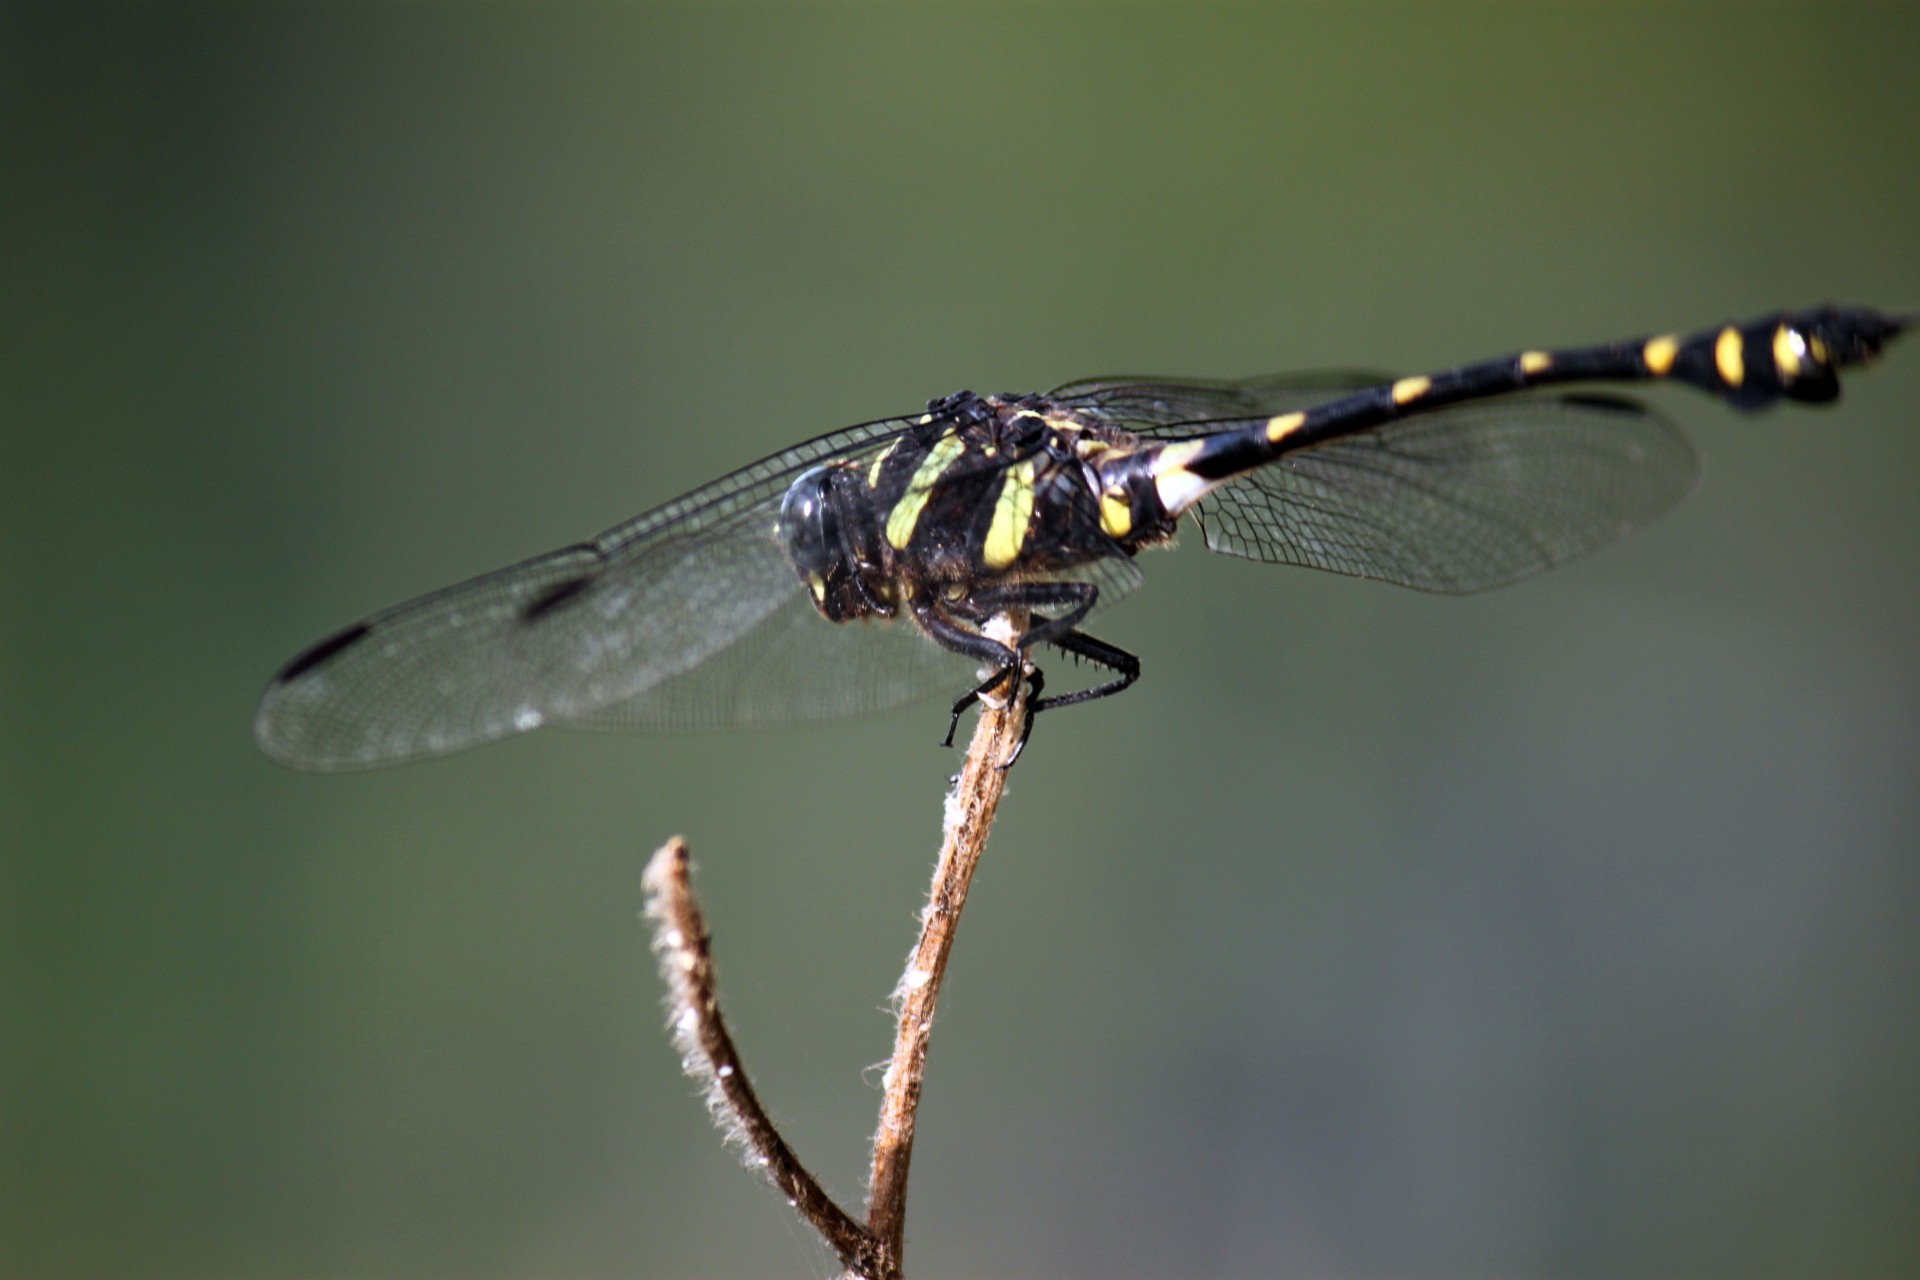 Black Dragonfly On The Stick